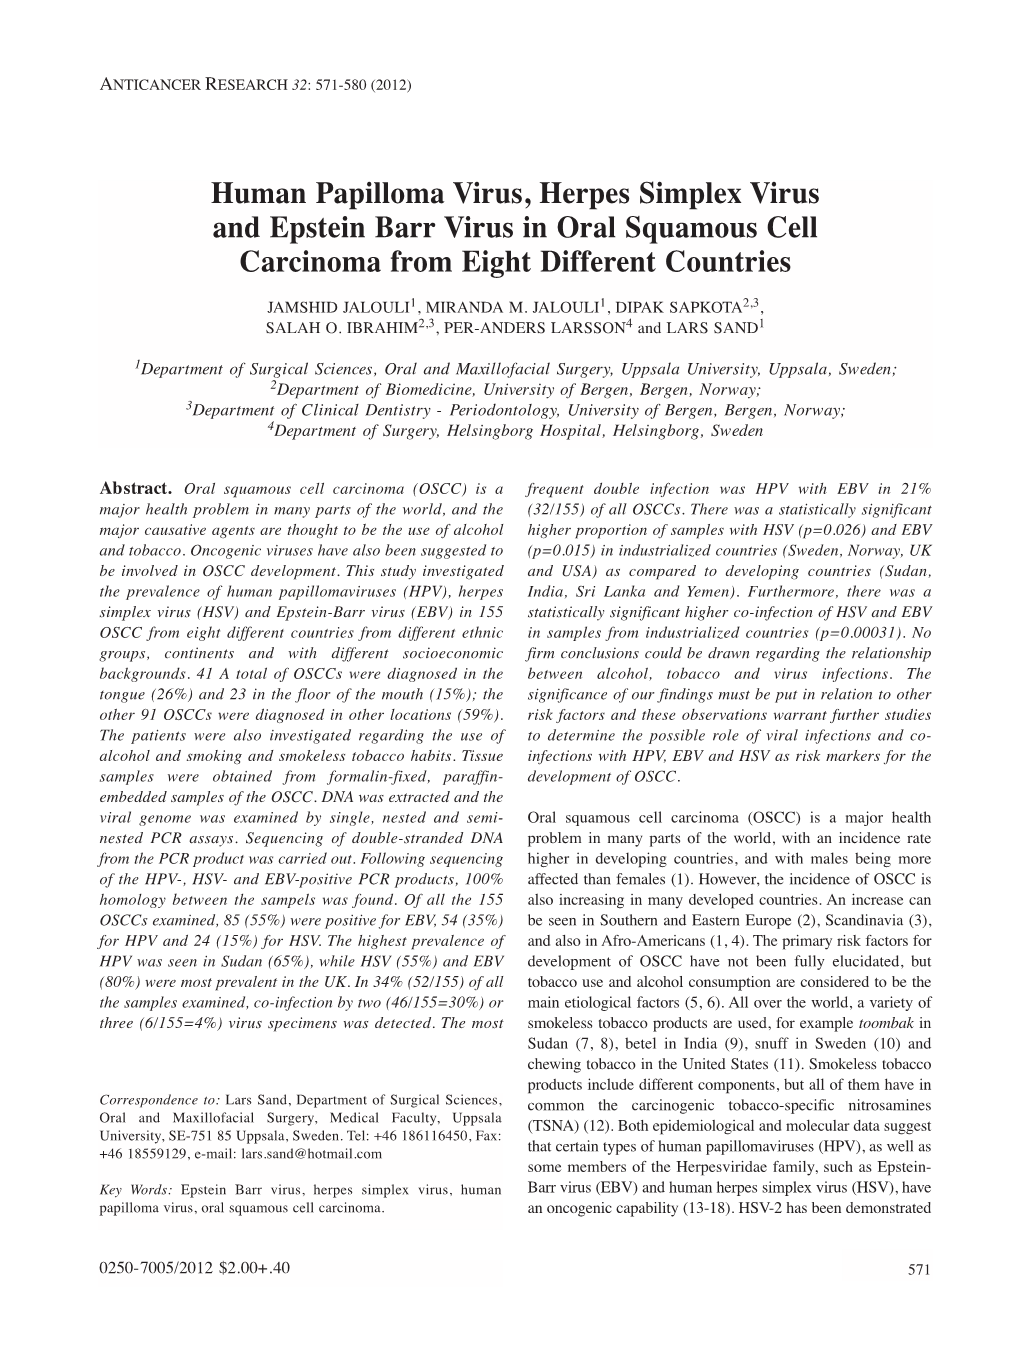 Human Papilloma Virus, Herpes Simplex Virus and Epstein Barr Virus in Oral Squamous Cell Carcinoma from Eight Different Countries